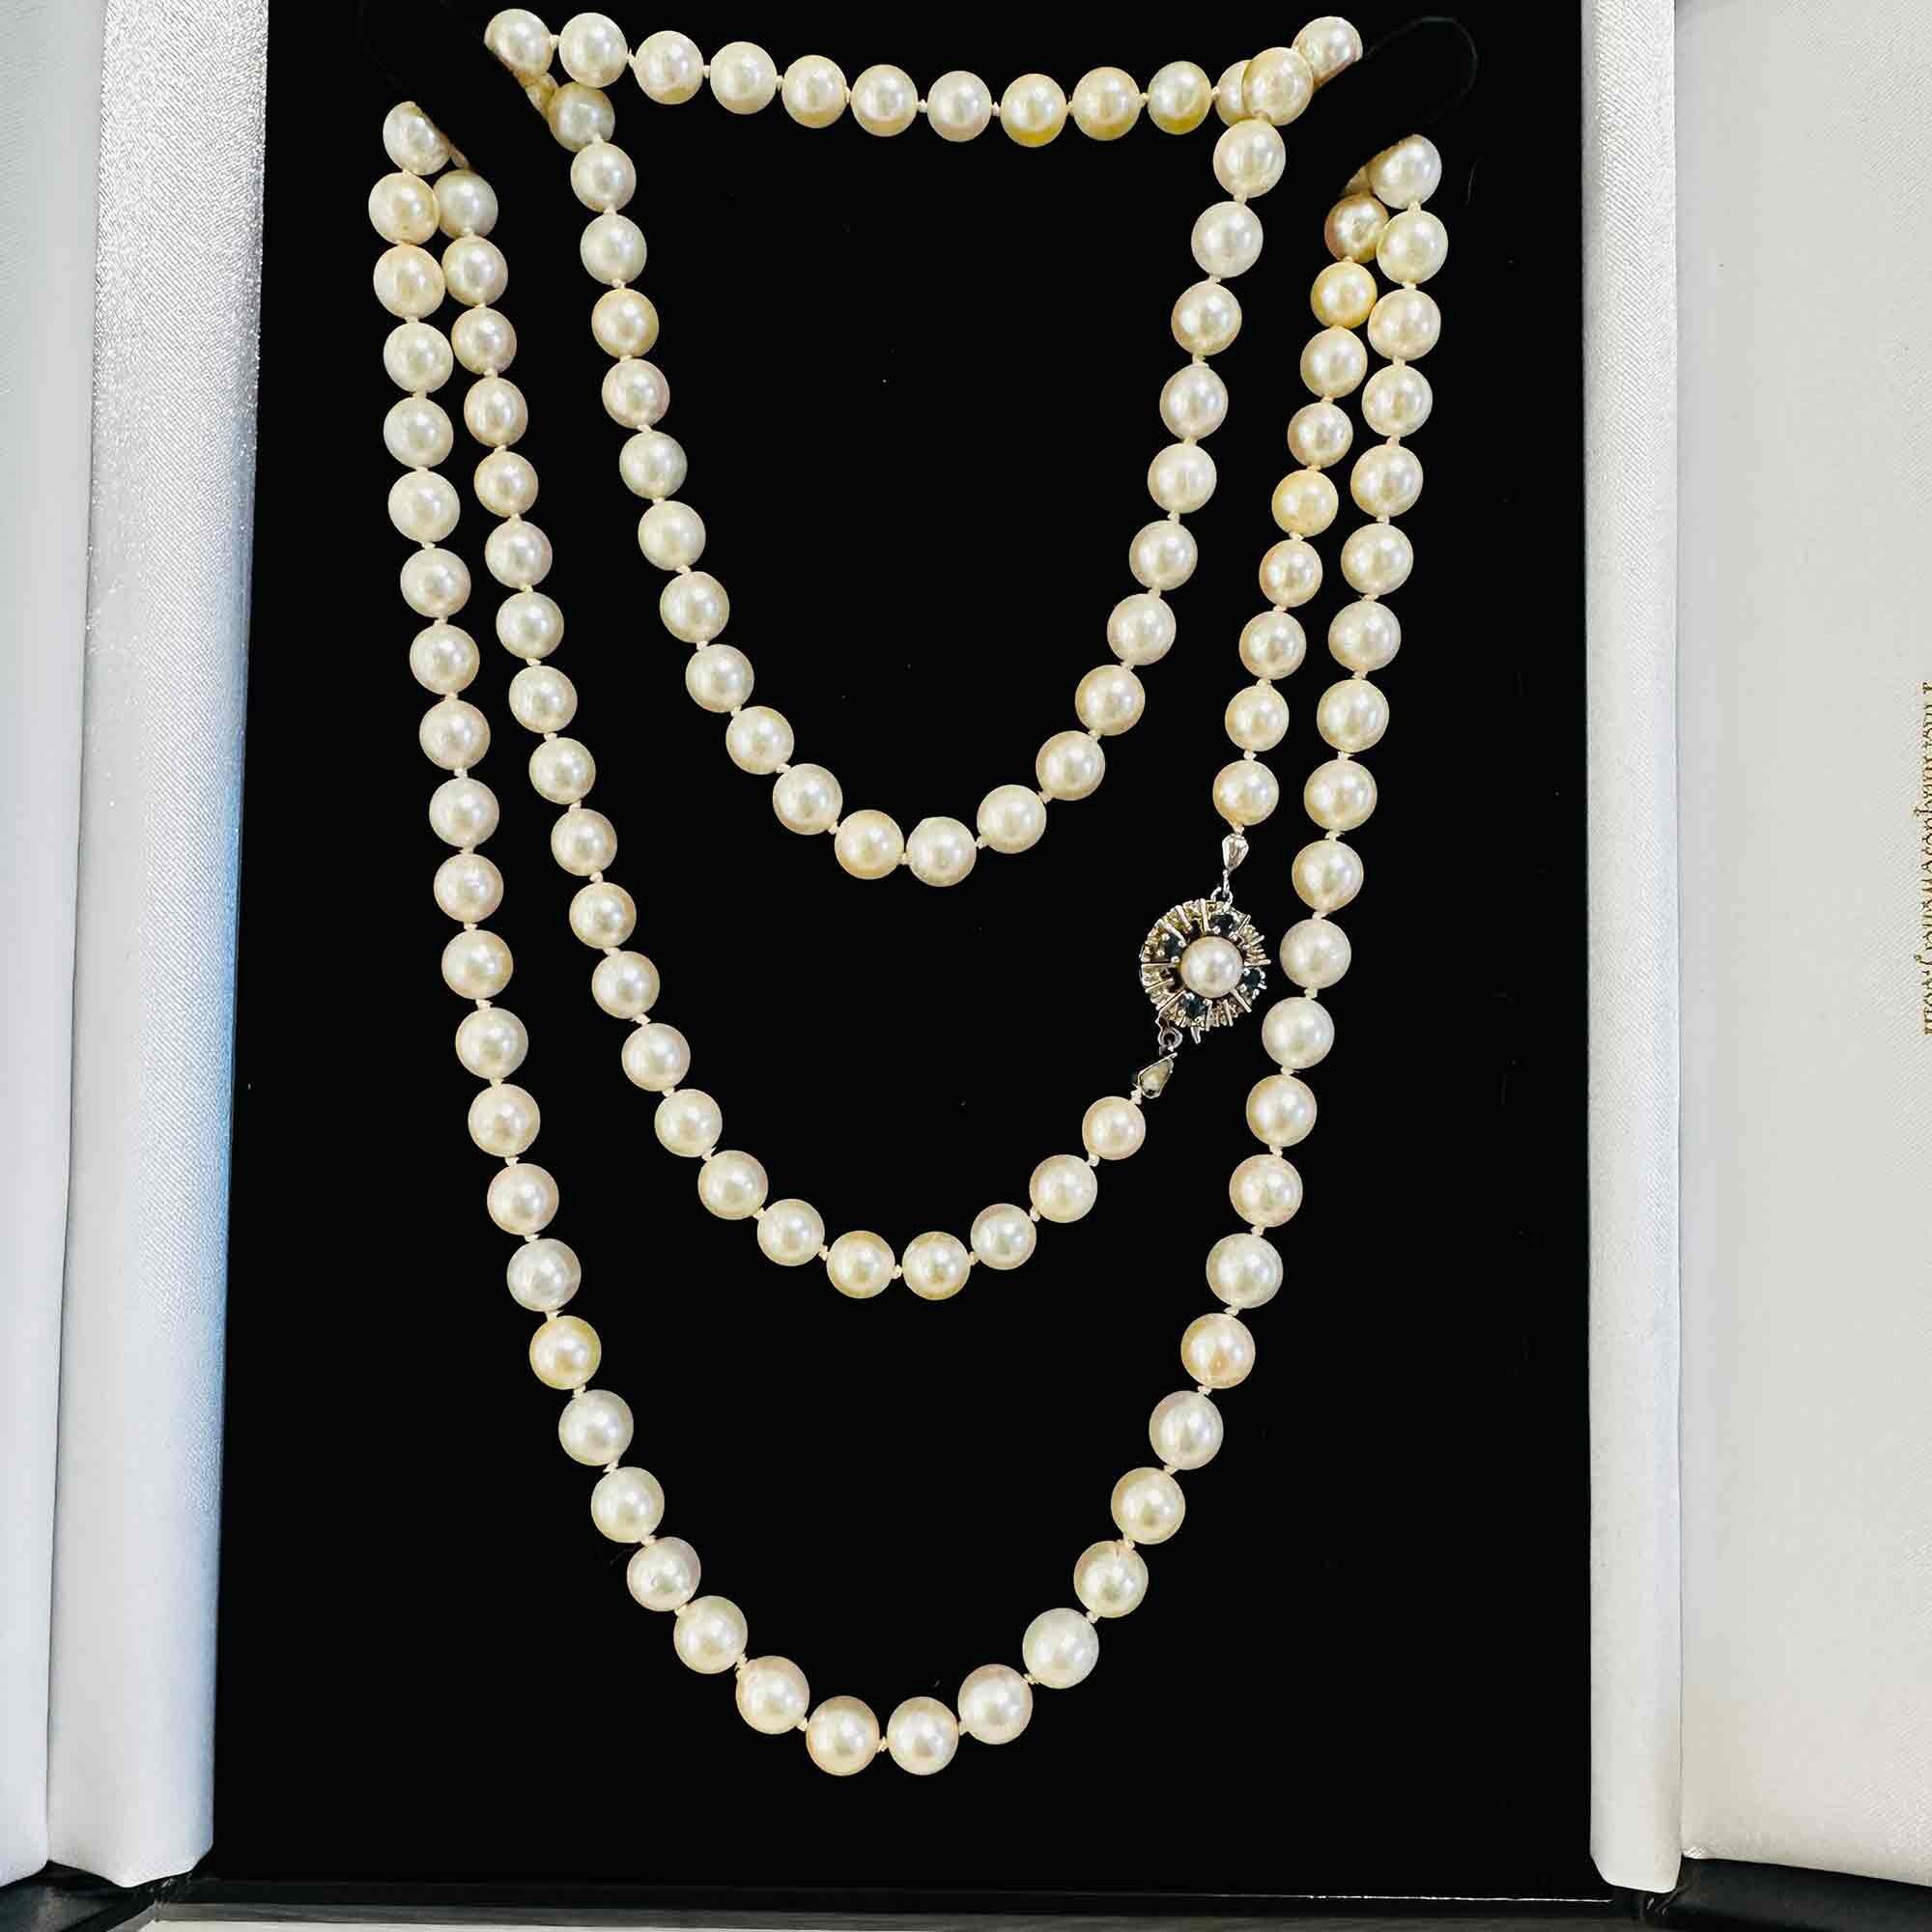 Vintage Pearl Necklace with White Gold and Pearl Clasp, Mikimoto (Lot 3120  - Luxury Accessories, Jewelry, & SilverMar 16, 2023, 10:00am)